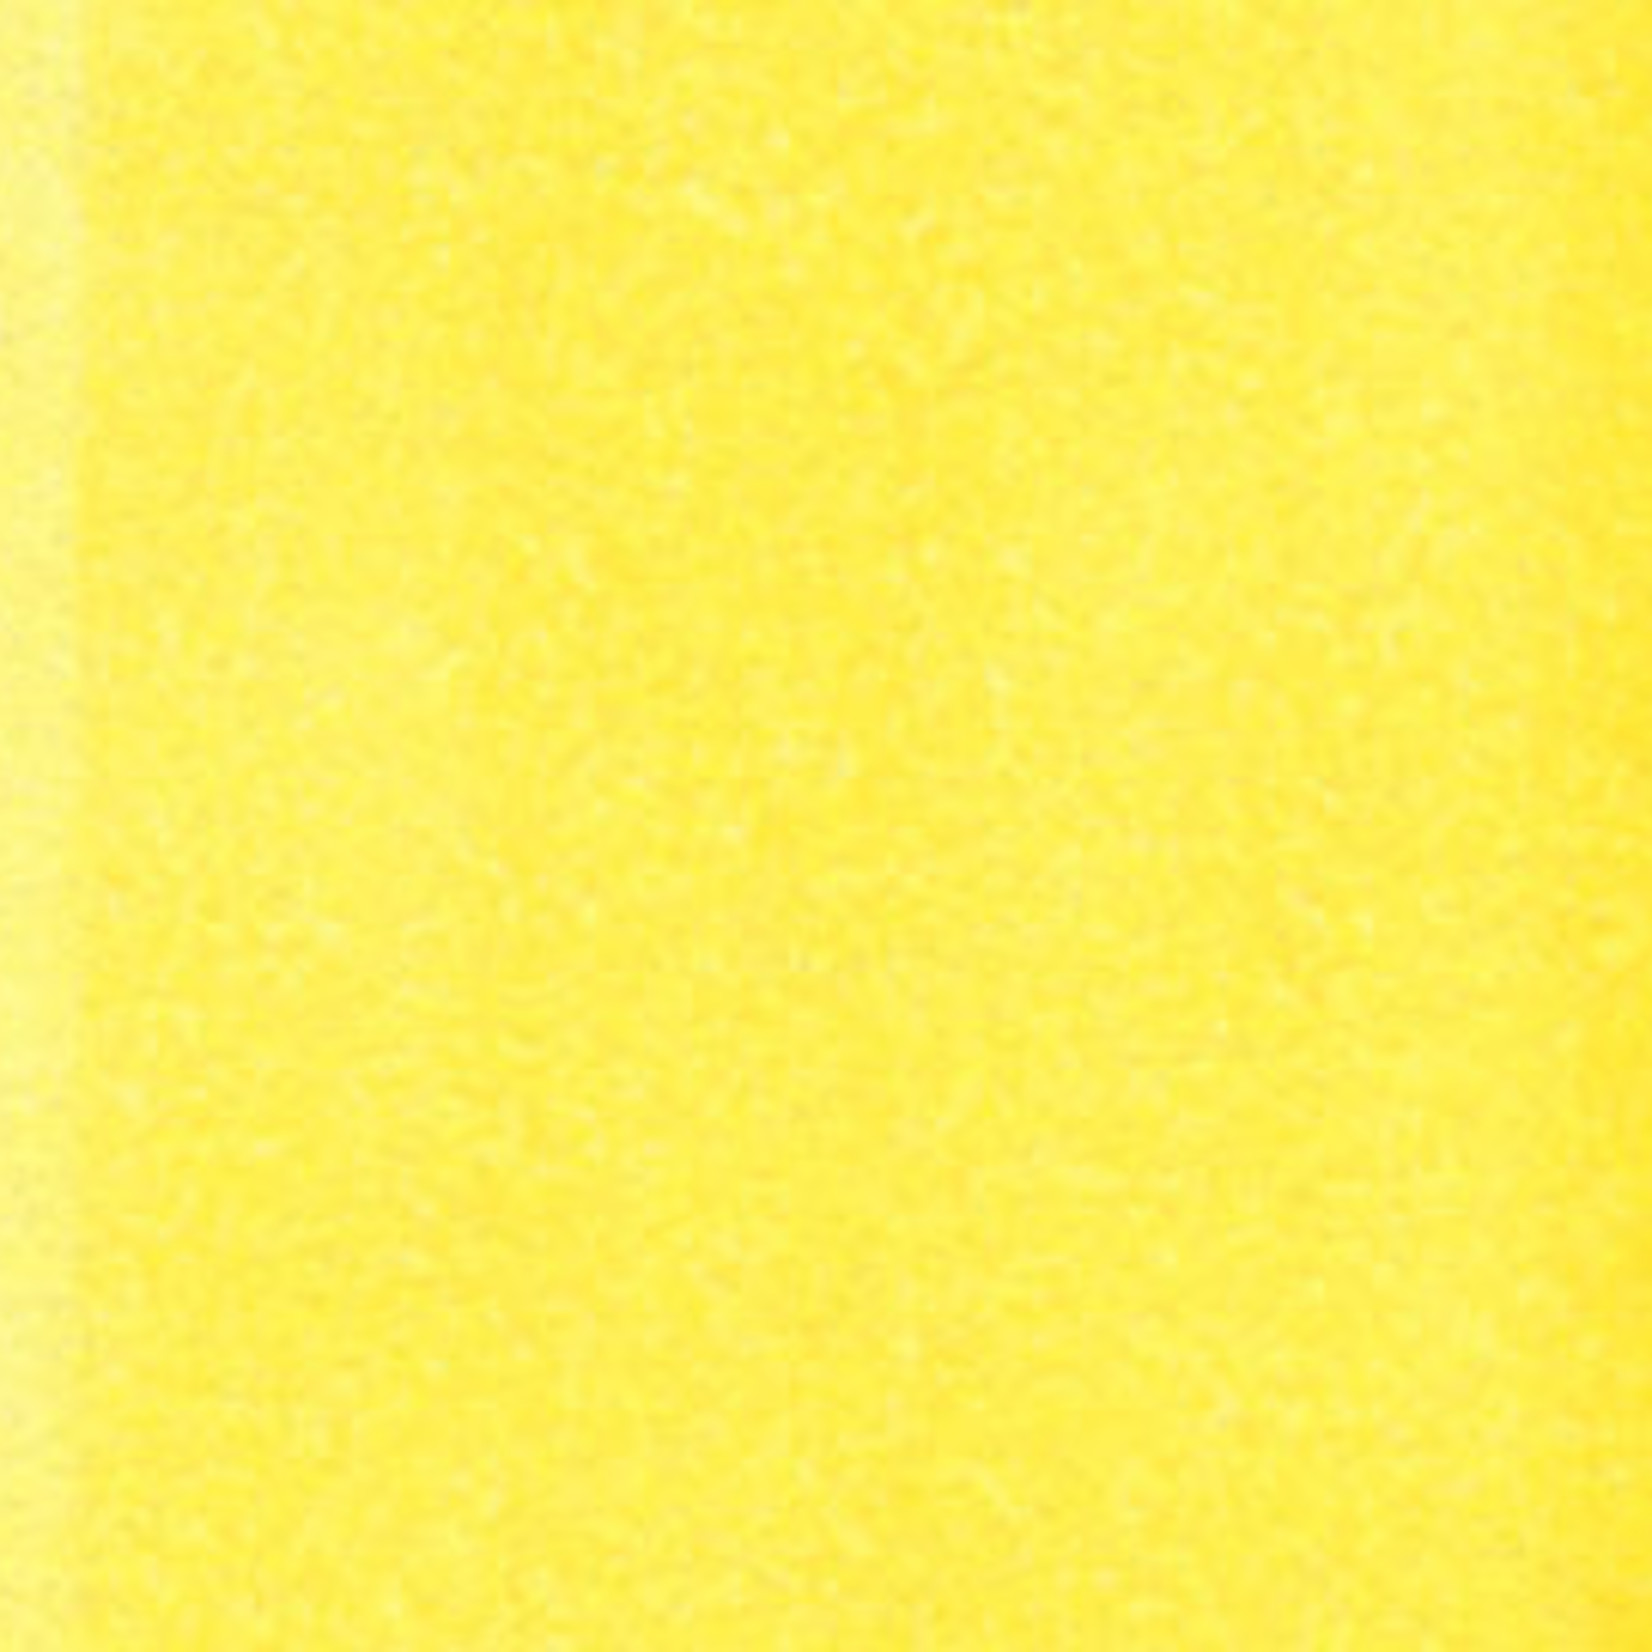 COPIC COPIC SKETCH Y11 PALE YELLOW